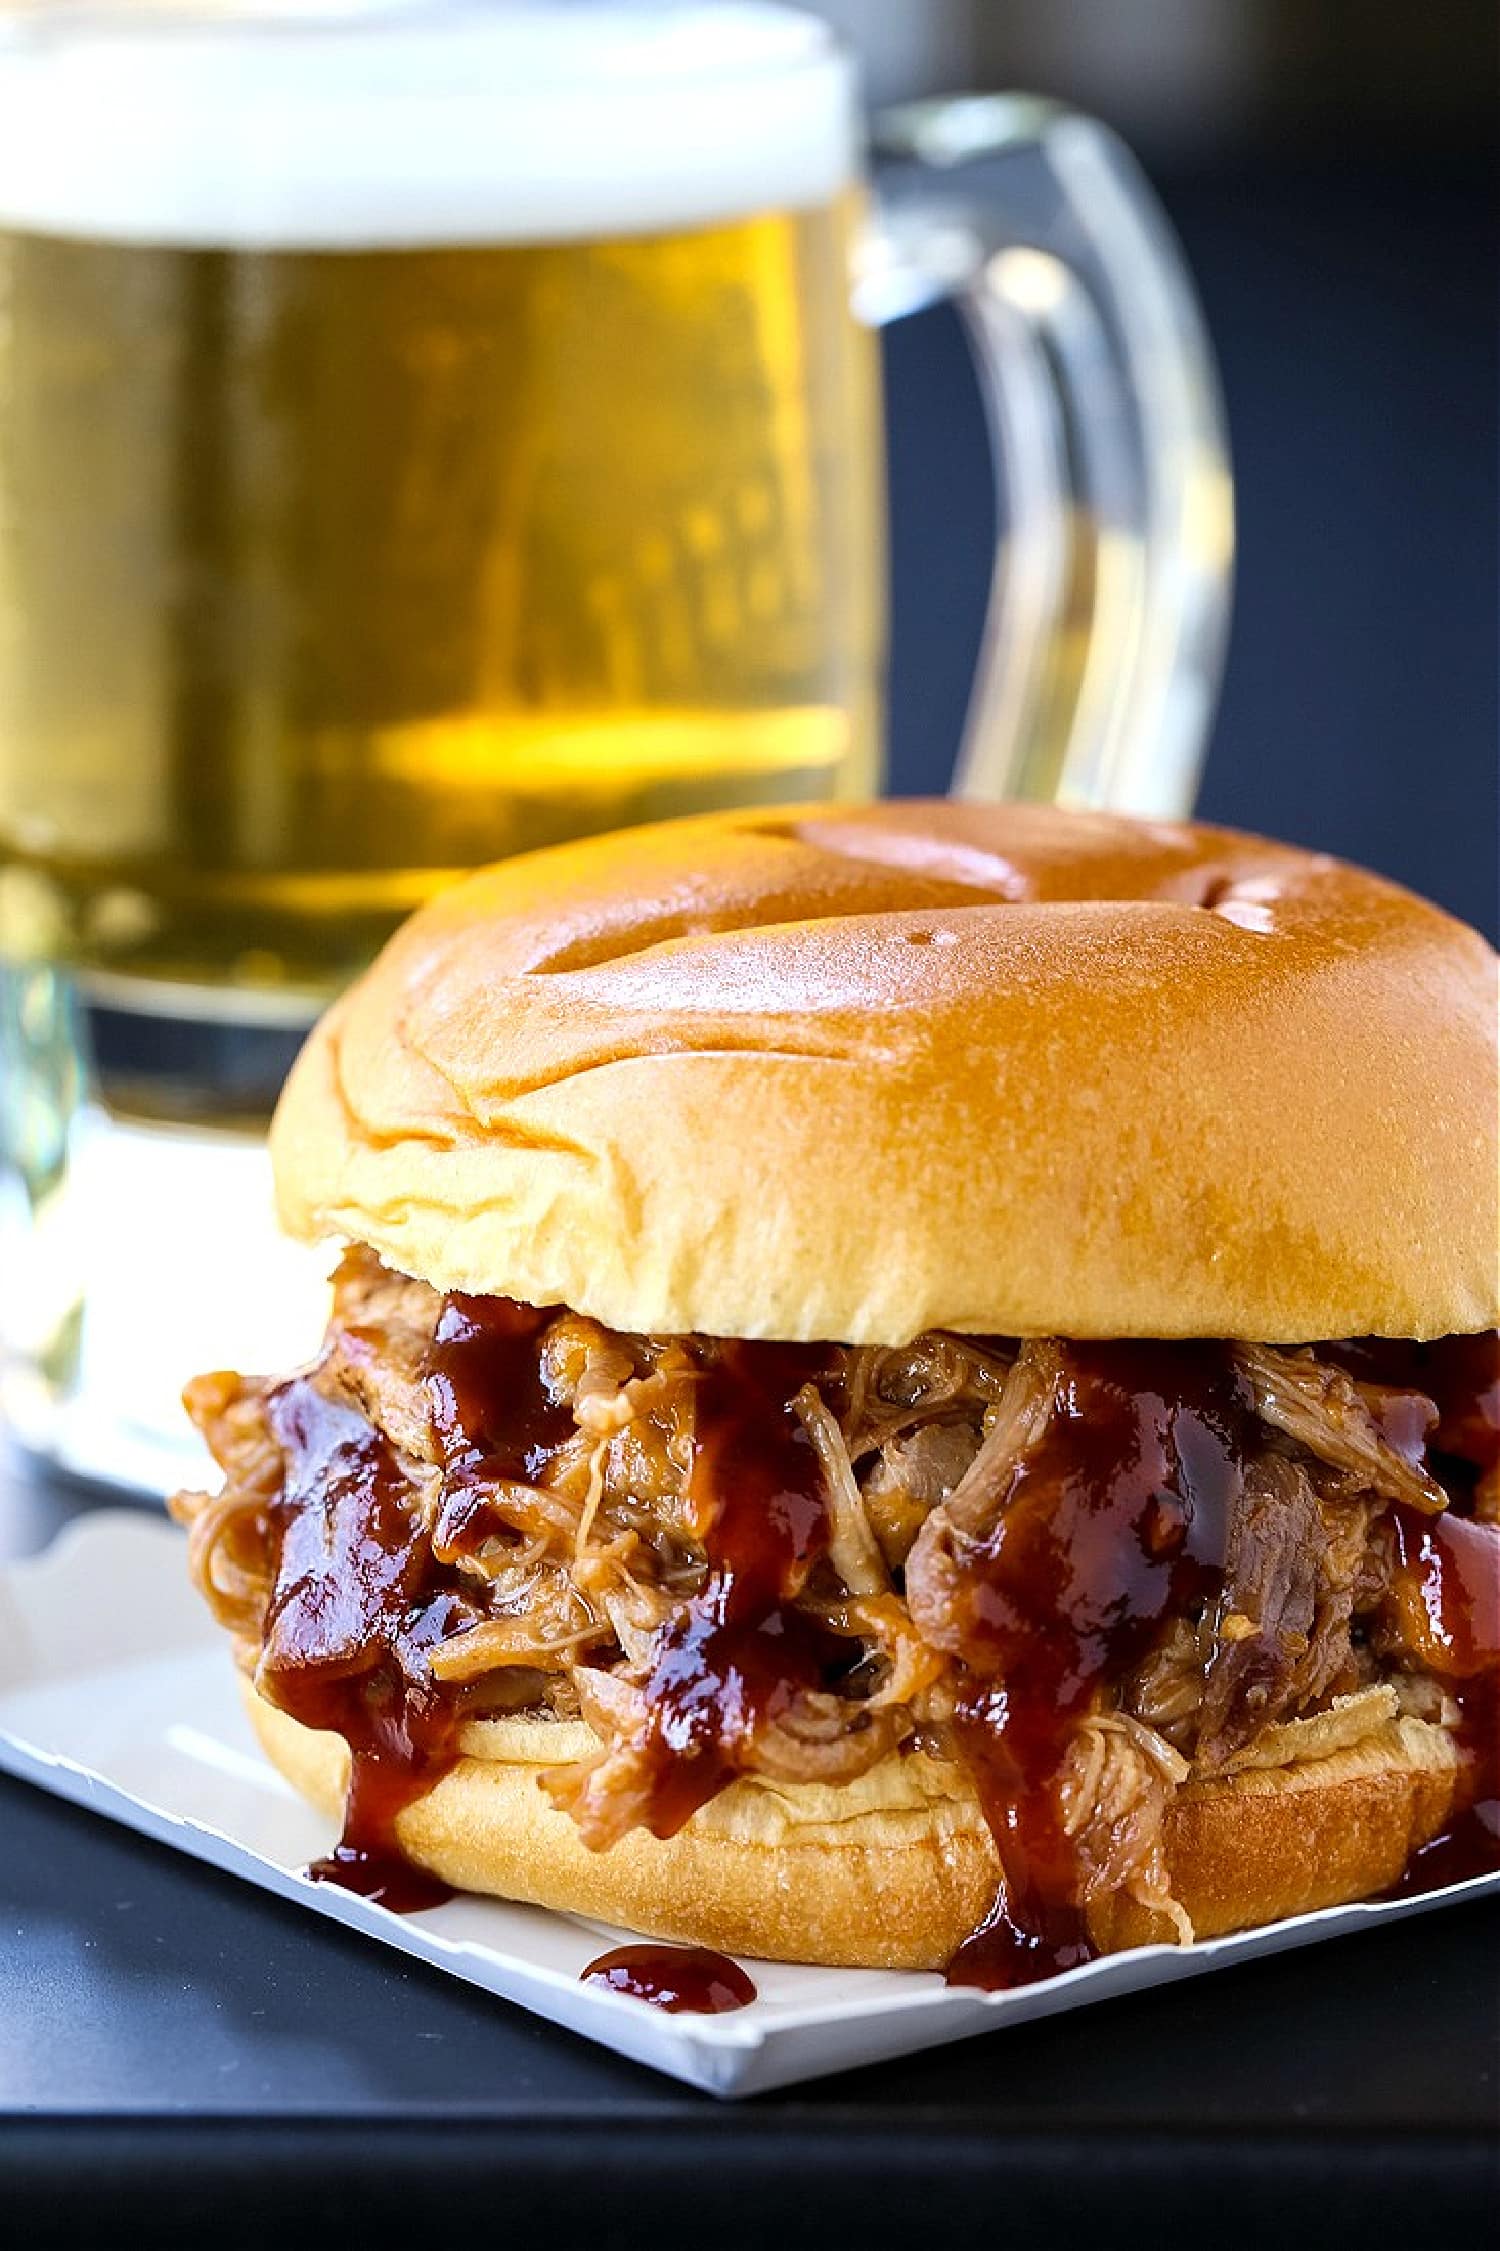 bbq pulled pork sandwich with beer in background